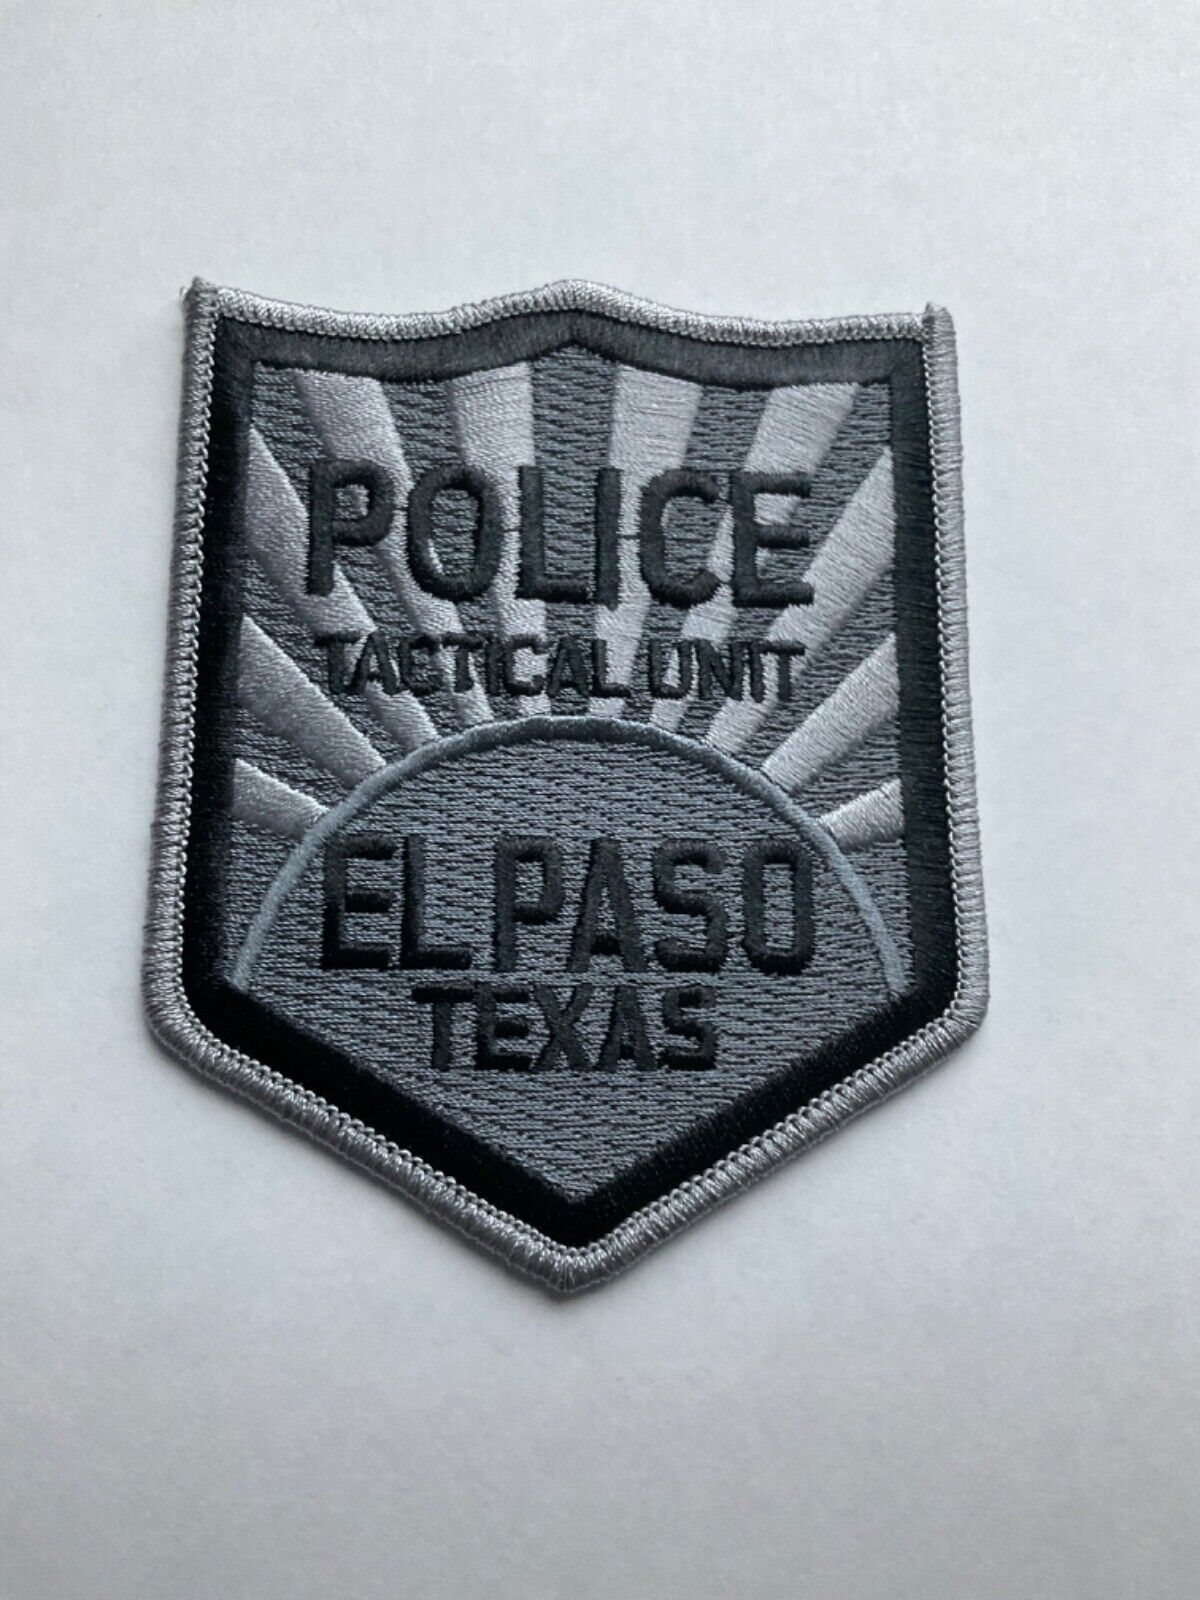 El Paso Police Tactical Team SWAT SRT Police State Texas TX